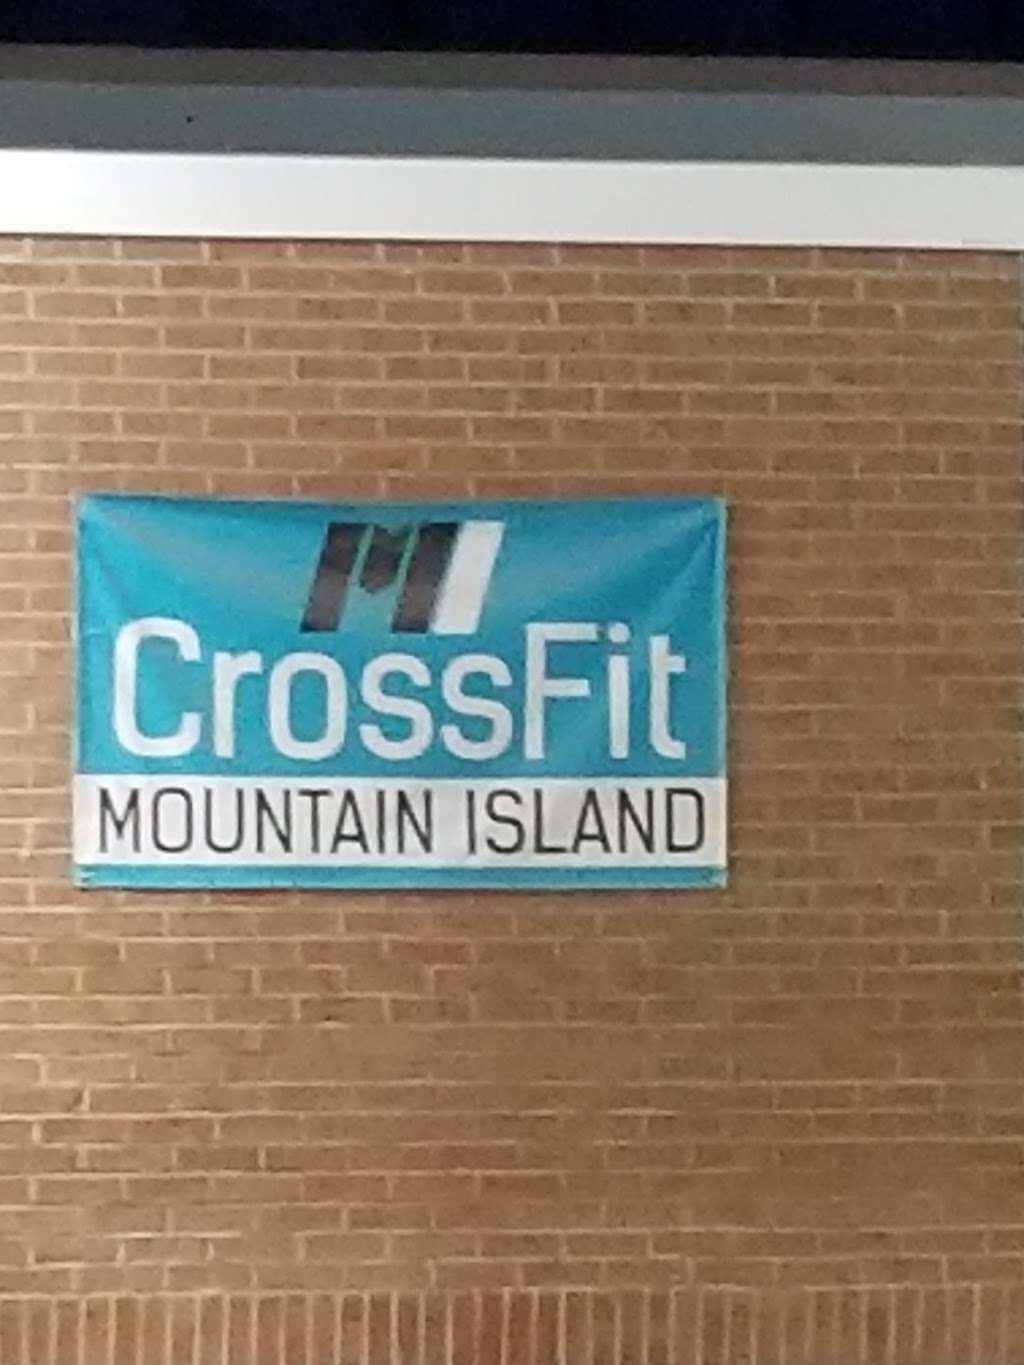 CrossFit Mountain Island | 8416 Bellhaven Blvd, Charlotte, NC 28216 | Phone: (803) 242-4816